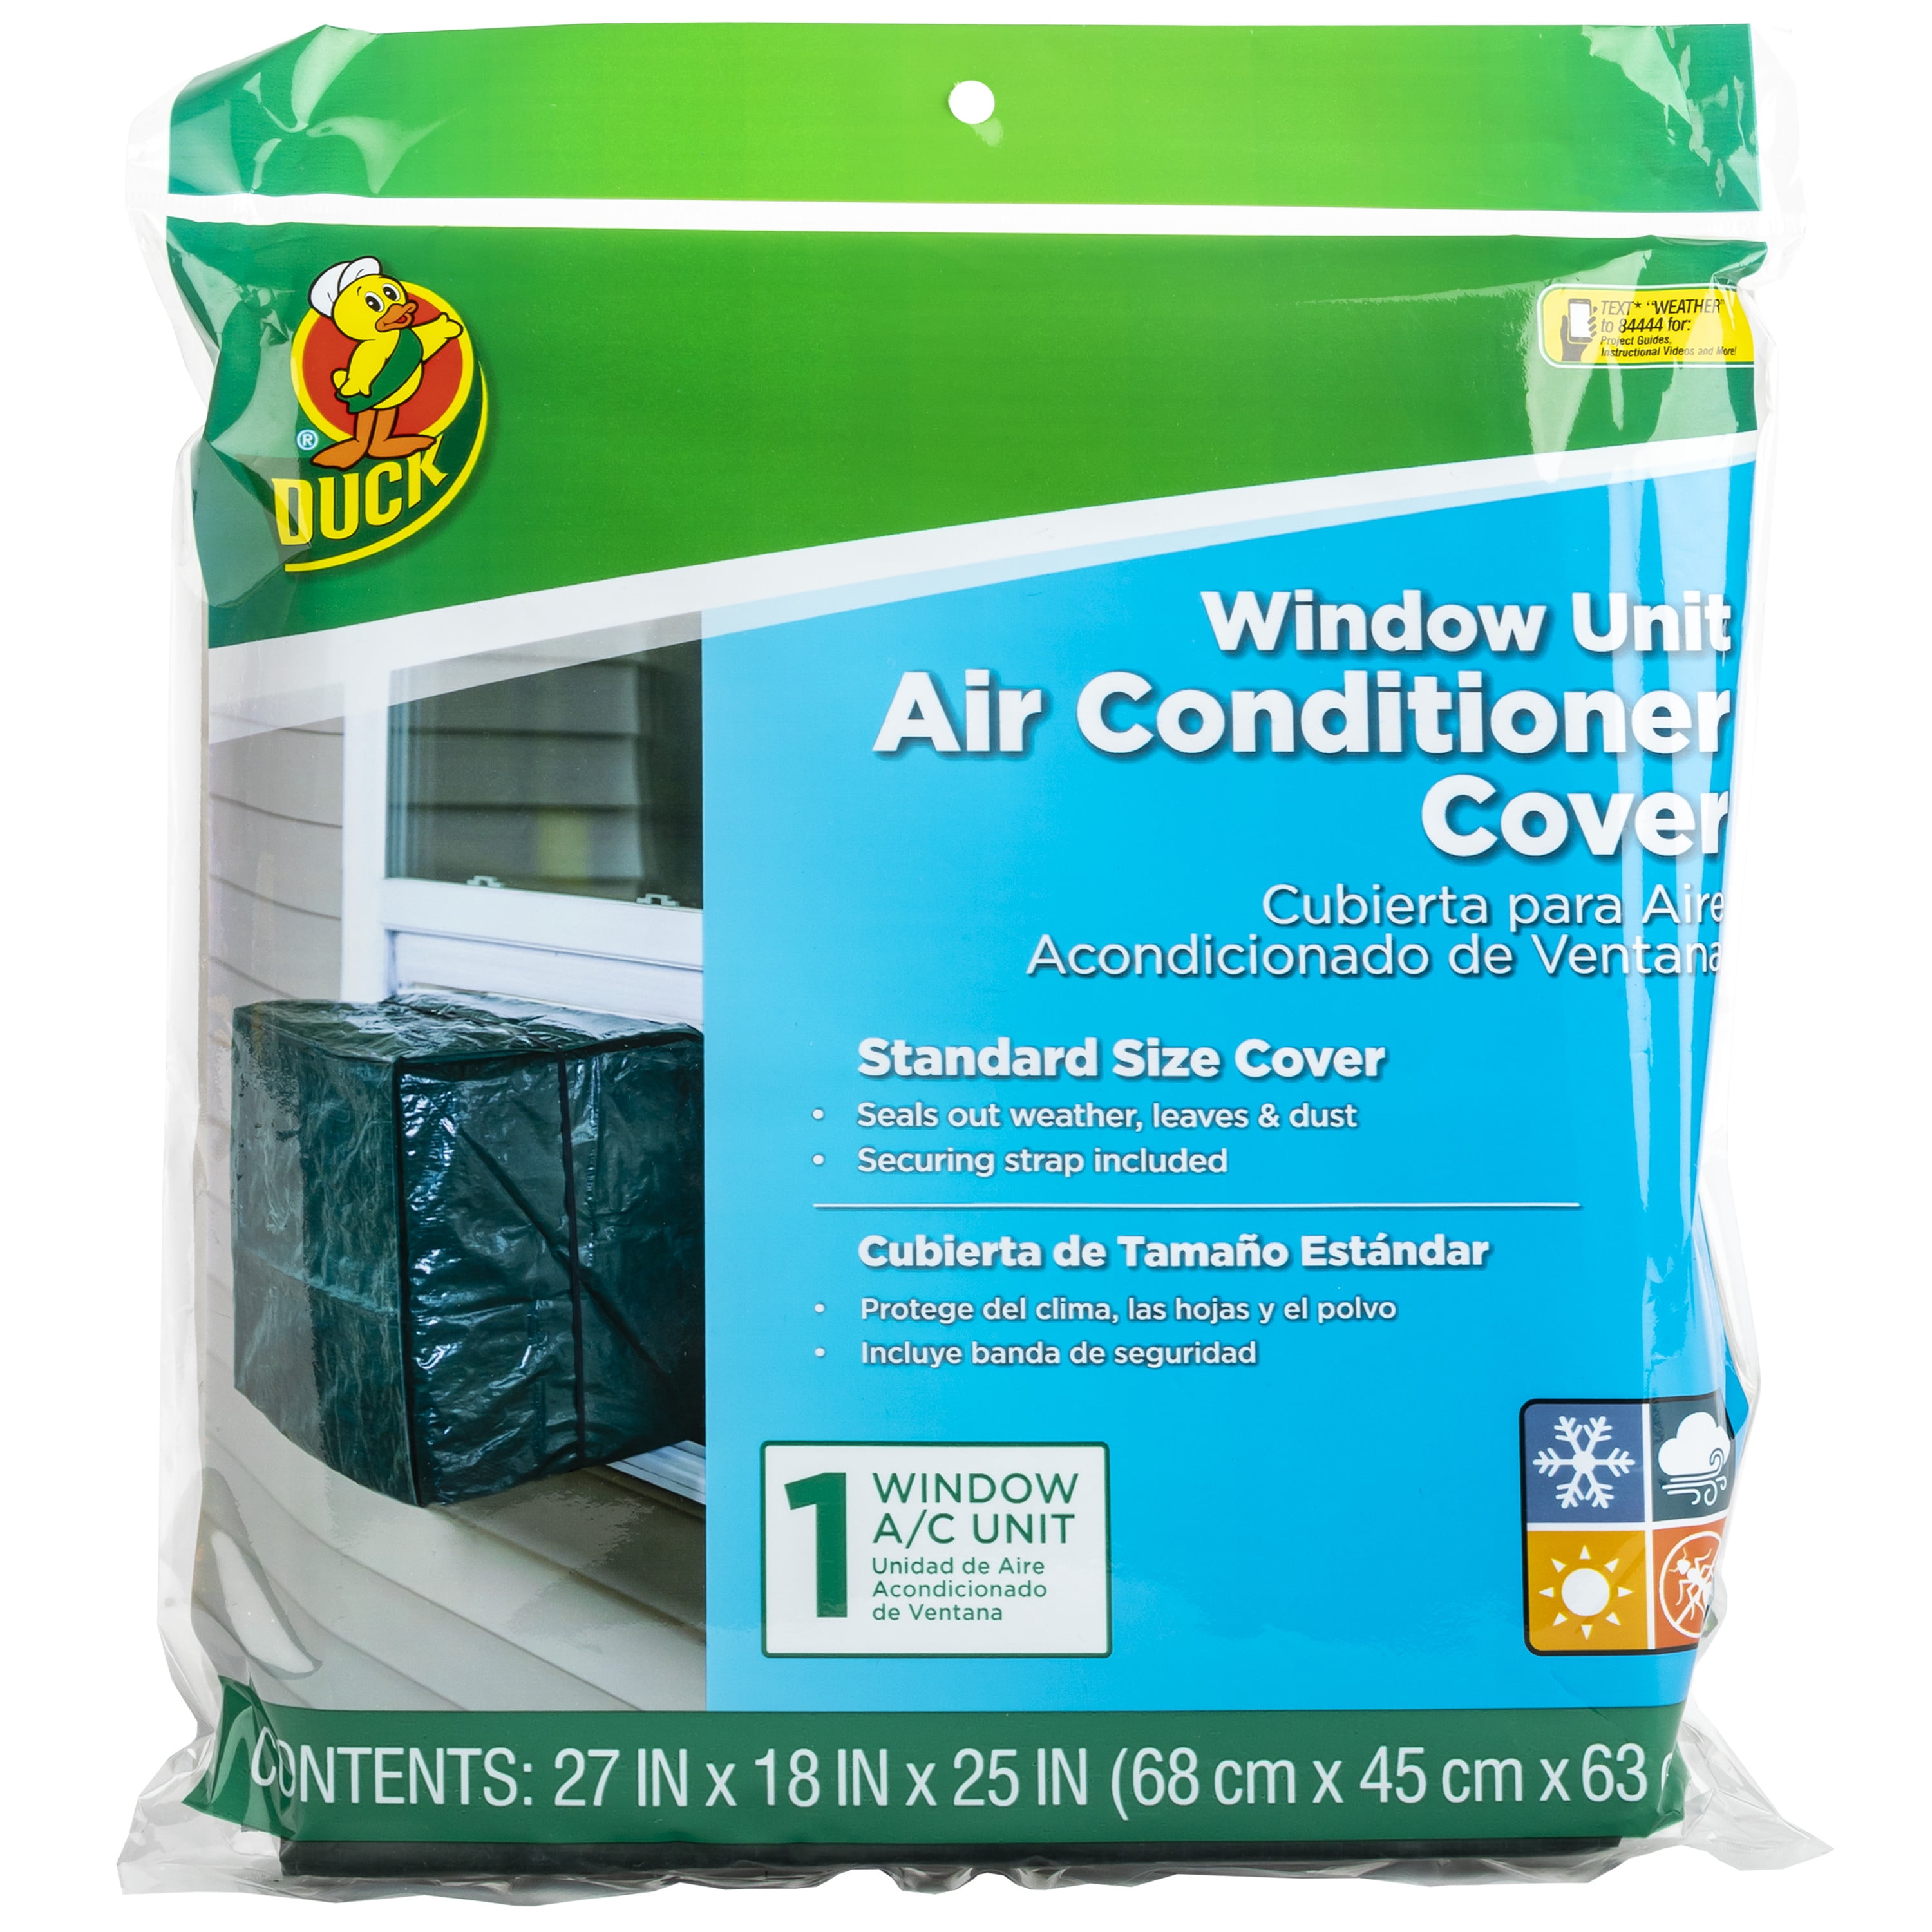 Air Conditioner Covers for Window Units Ac Cover for 17"W x 13"H x 12"D 